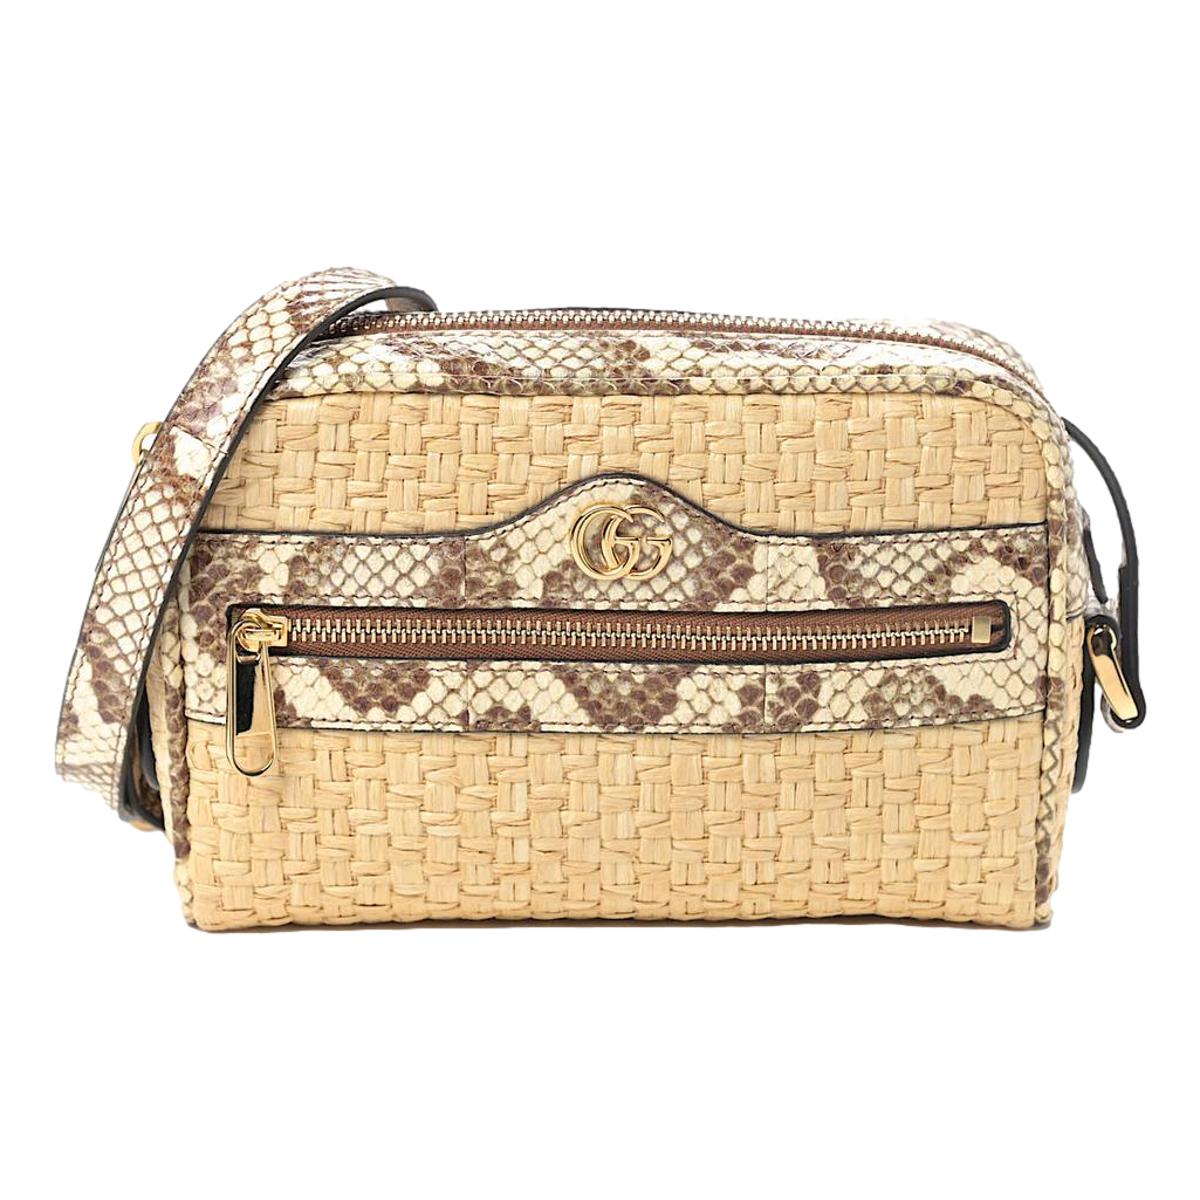 Gucci Ophidia Mini Bag Raffia Watersnake Shoulder Bag Beige 574493 at_Queen_Bee_of_Beverly_Hills